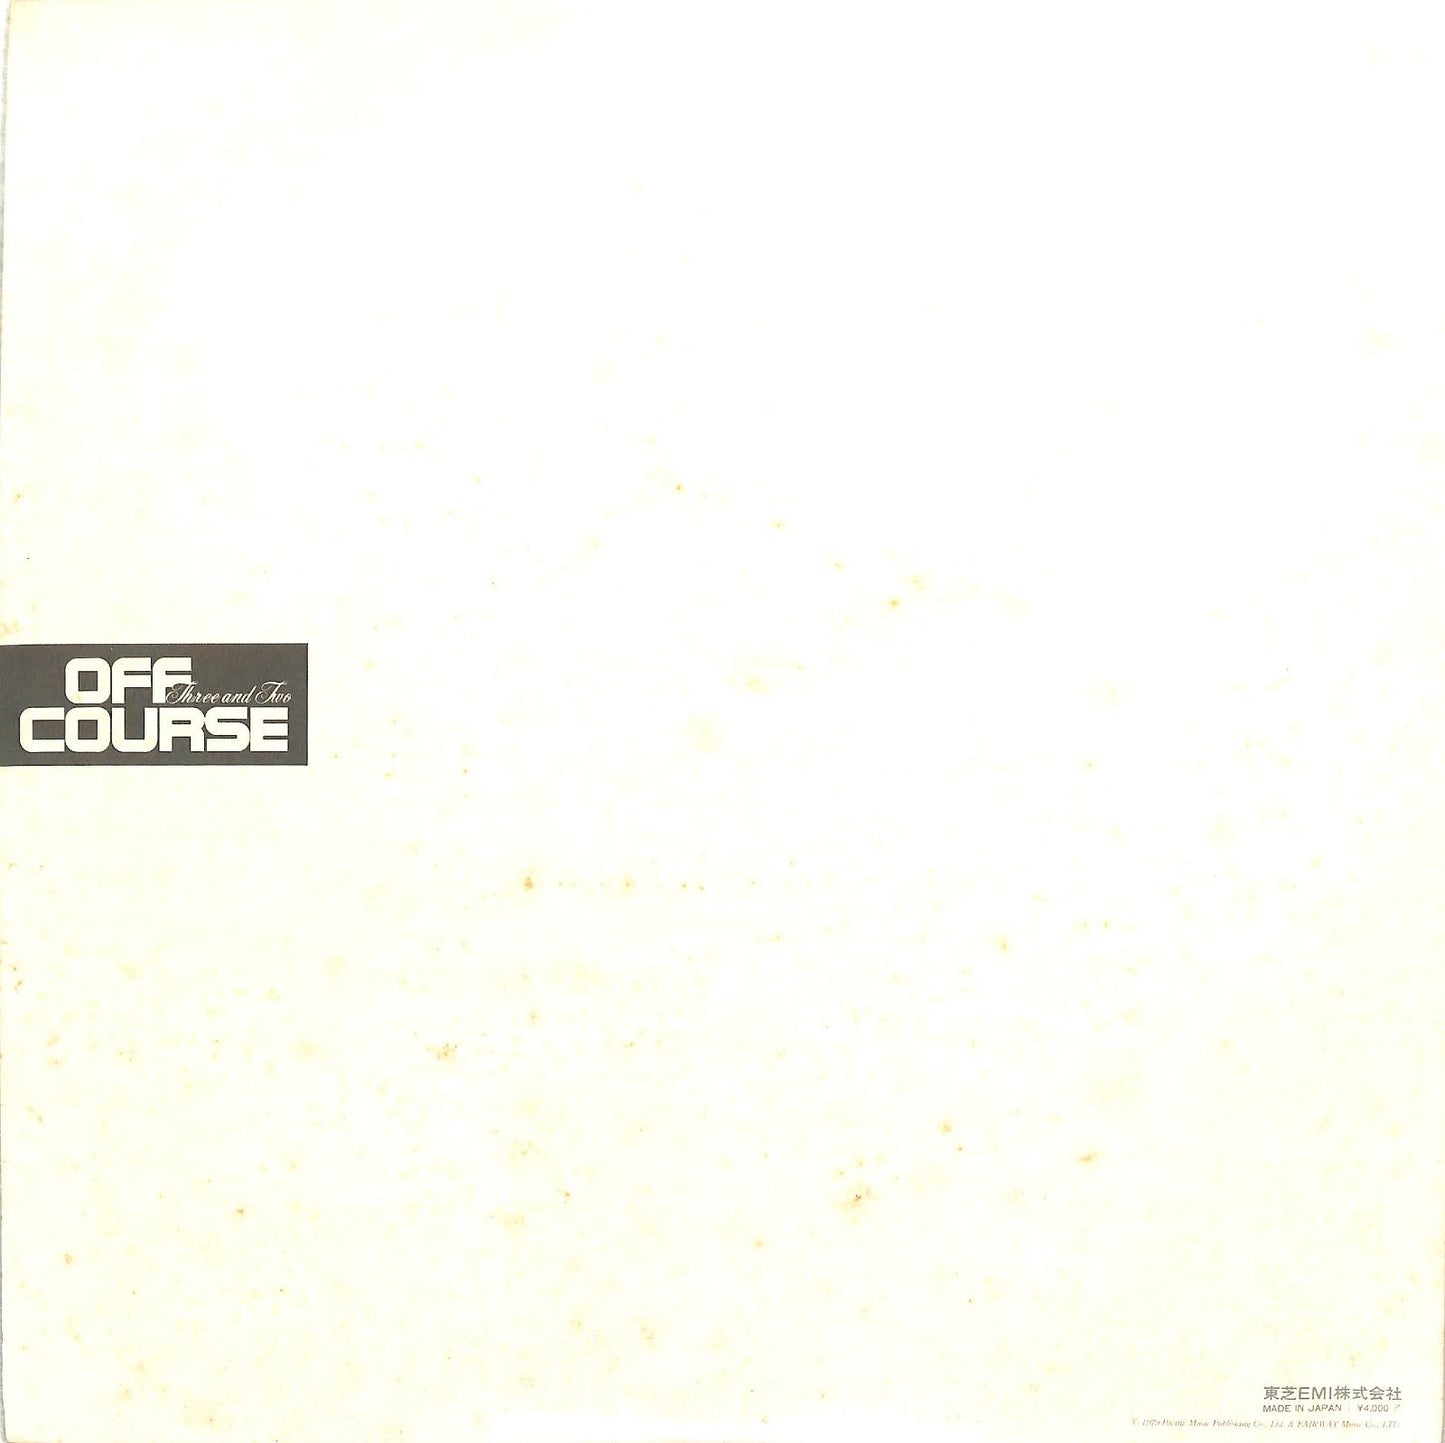 OFF COURSE - Live